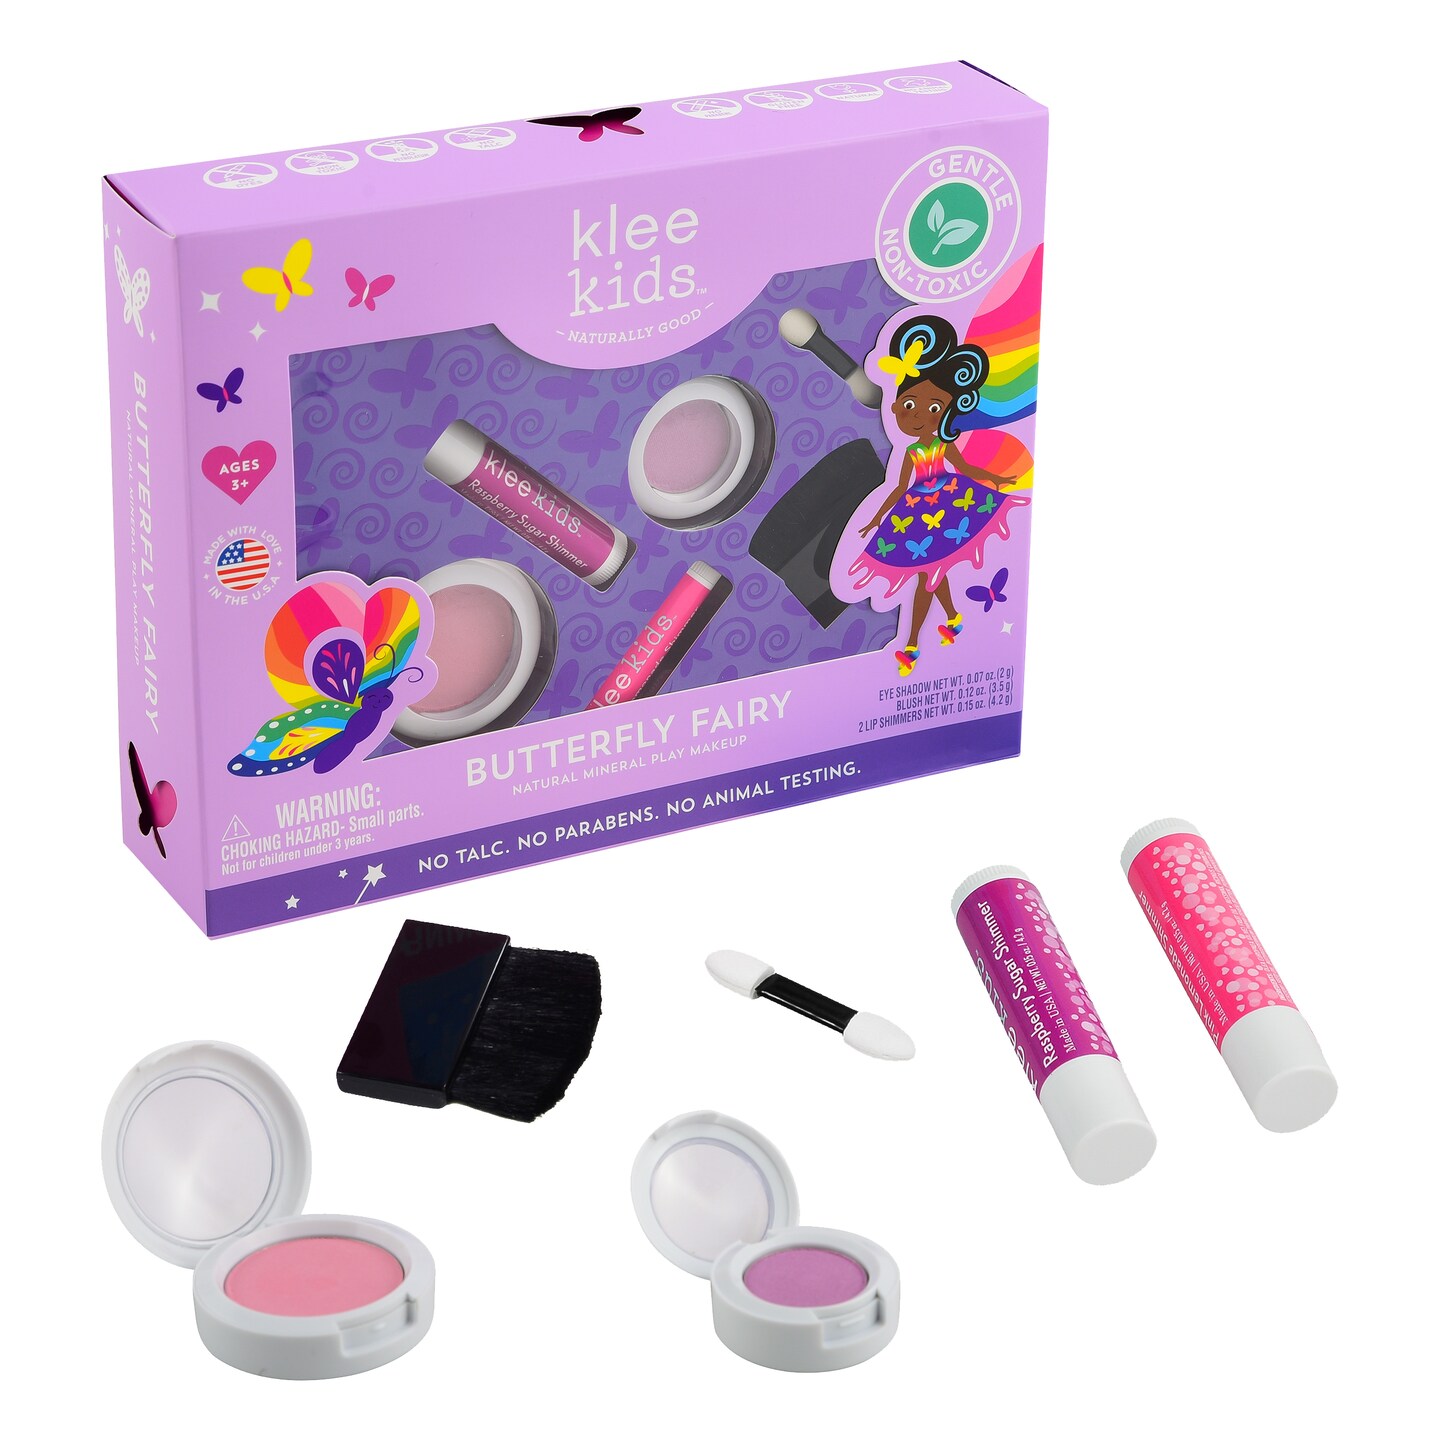 Klee Naturals Butterfly Fairy 4-PC Natural Play Makeup Kit